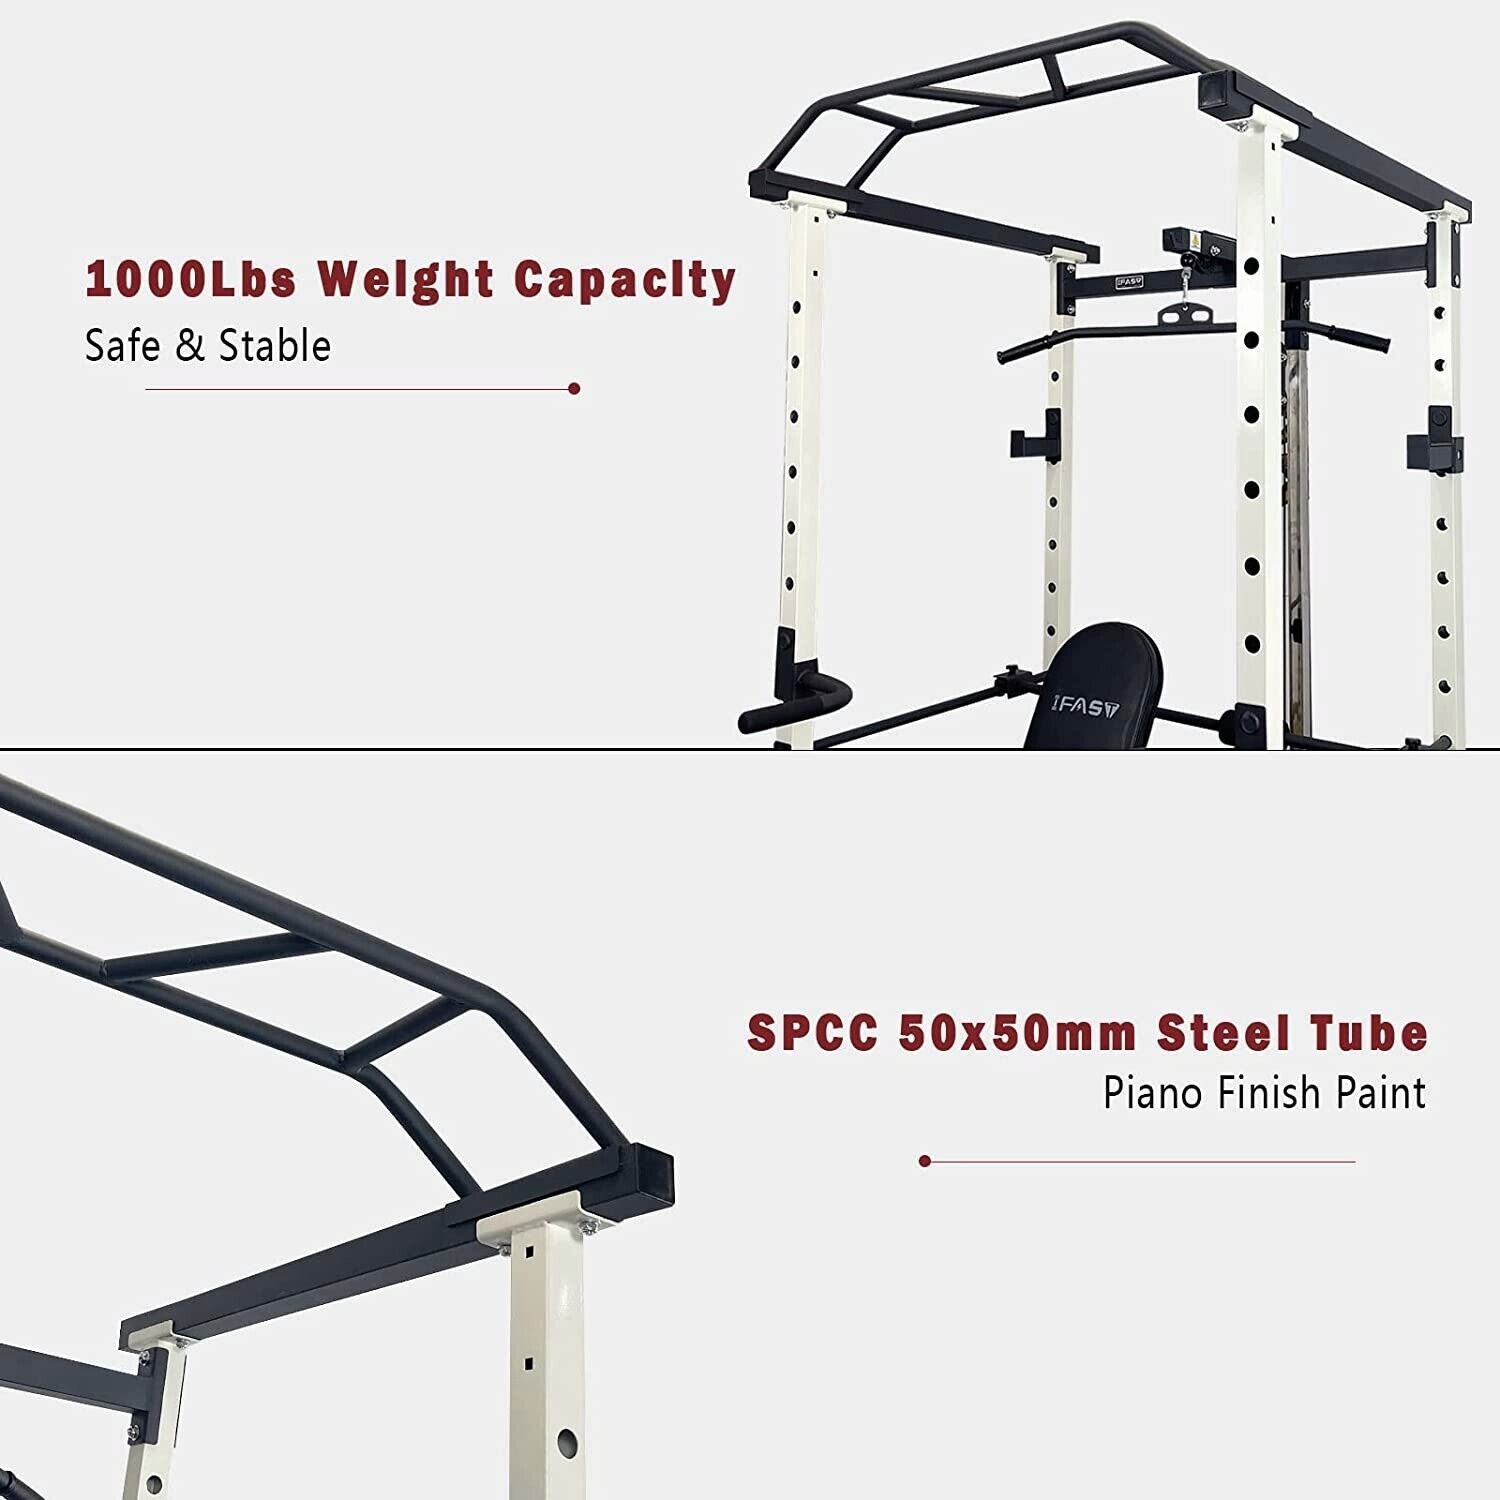 Power Cage Squat Rack Stands Gym Equipment 1000-Pound